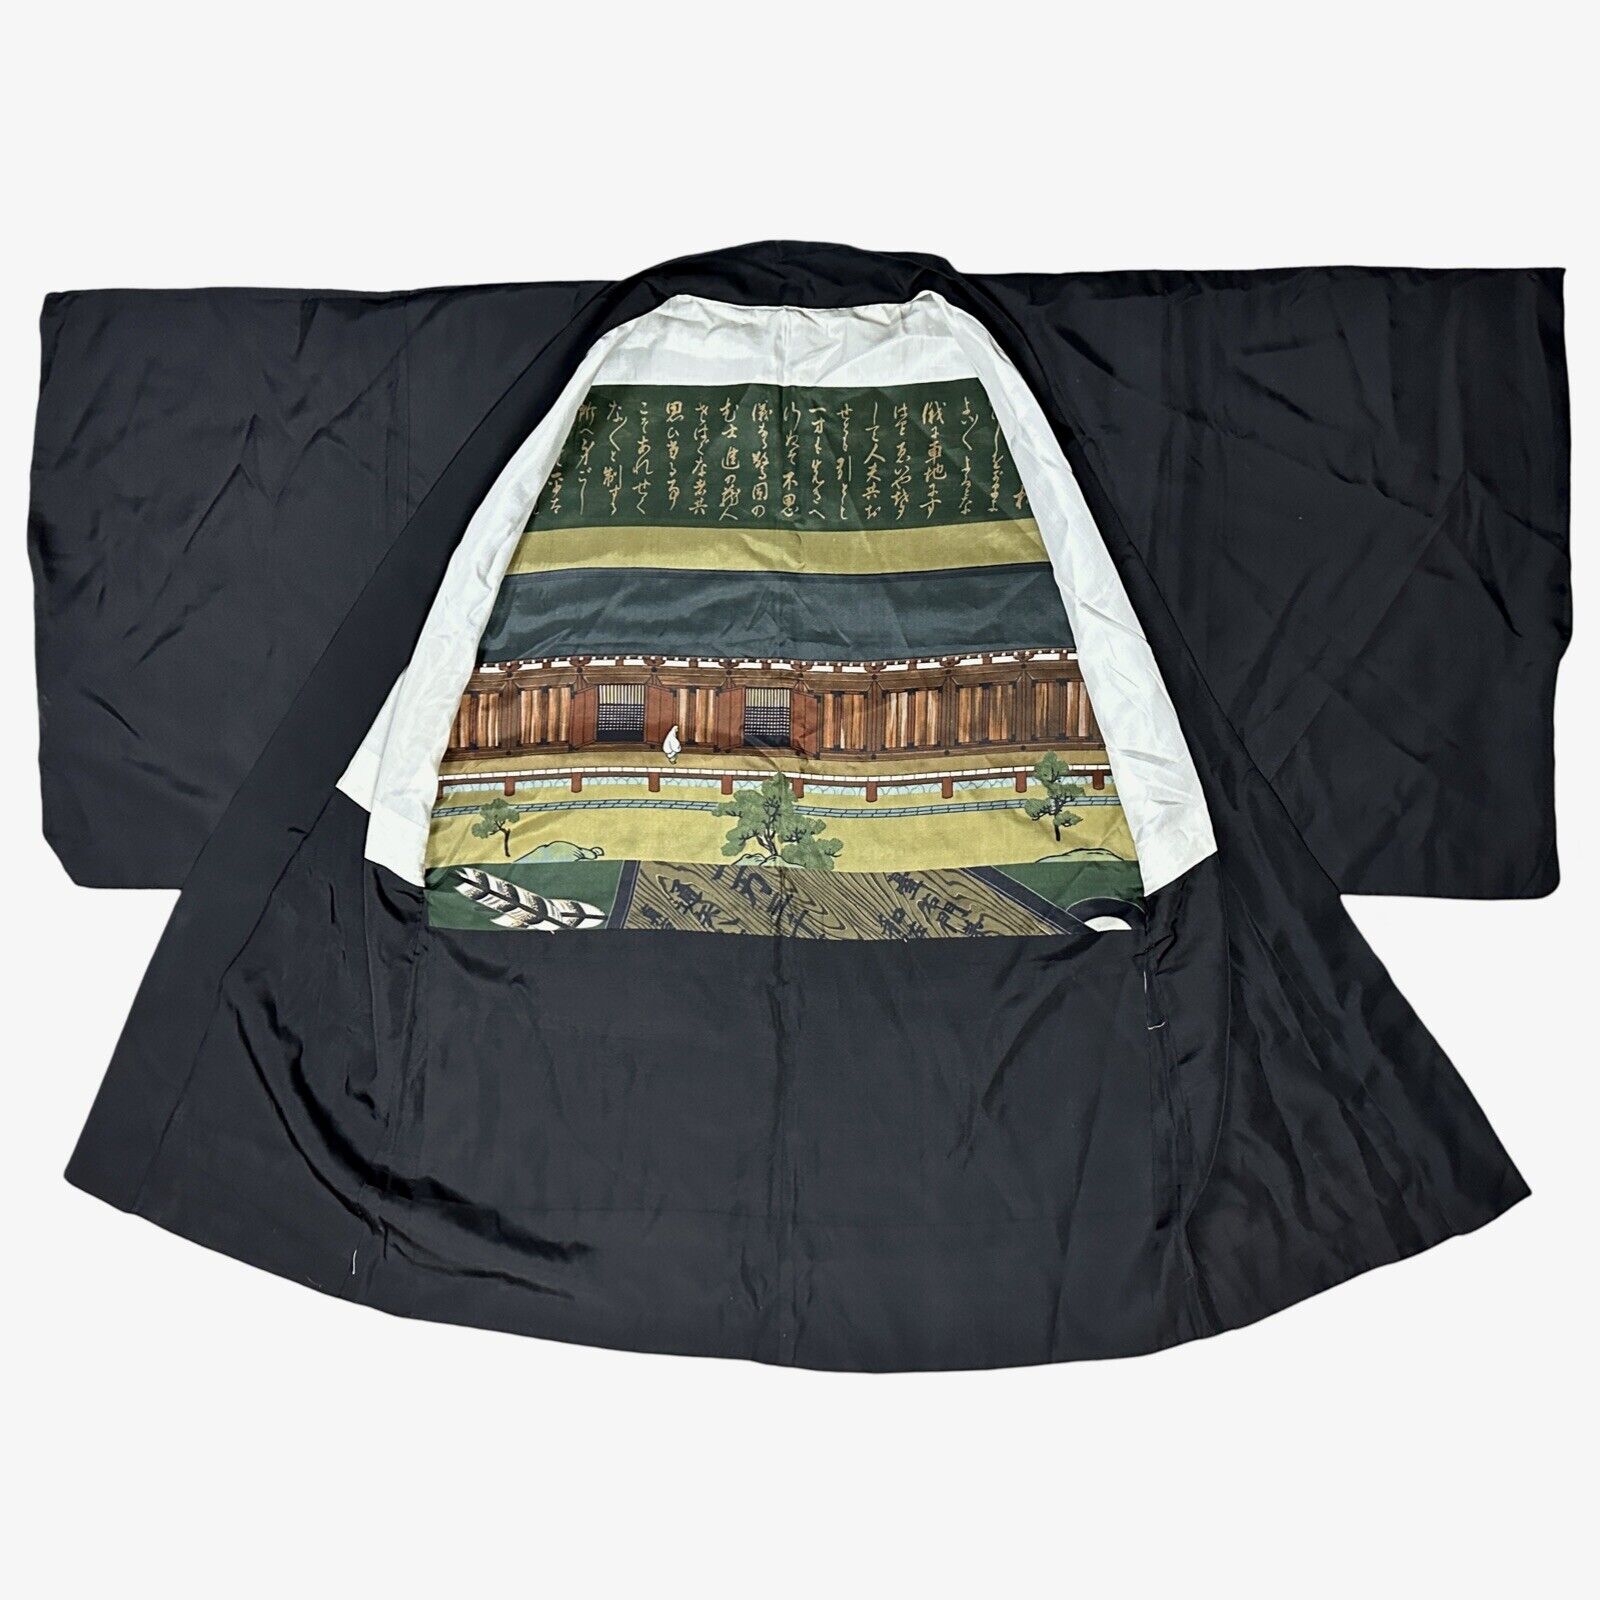 Vintage Men’s Black Formal Haori with Temple & Figure Lining and Crests